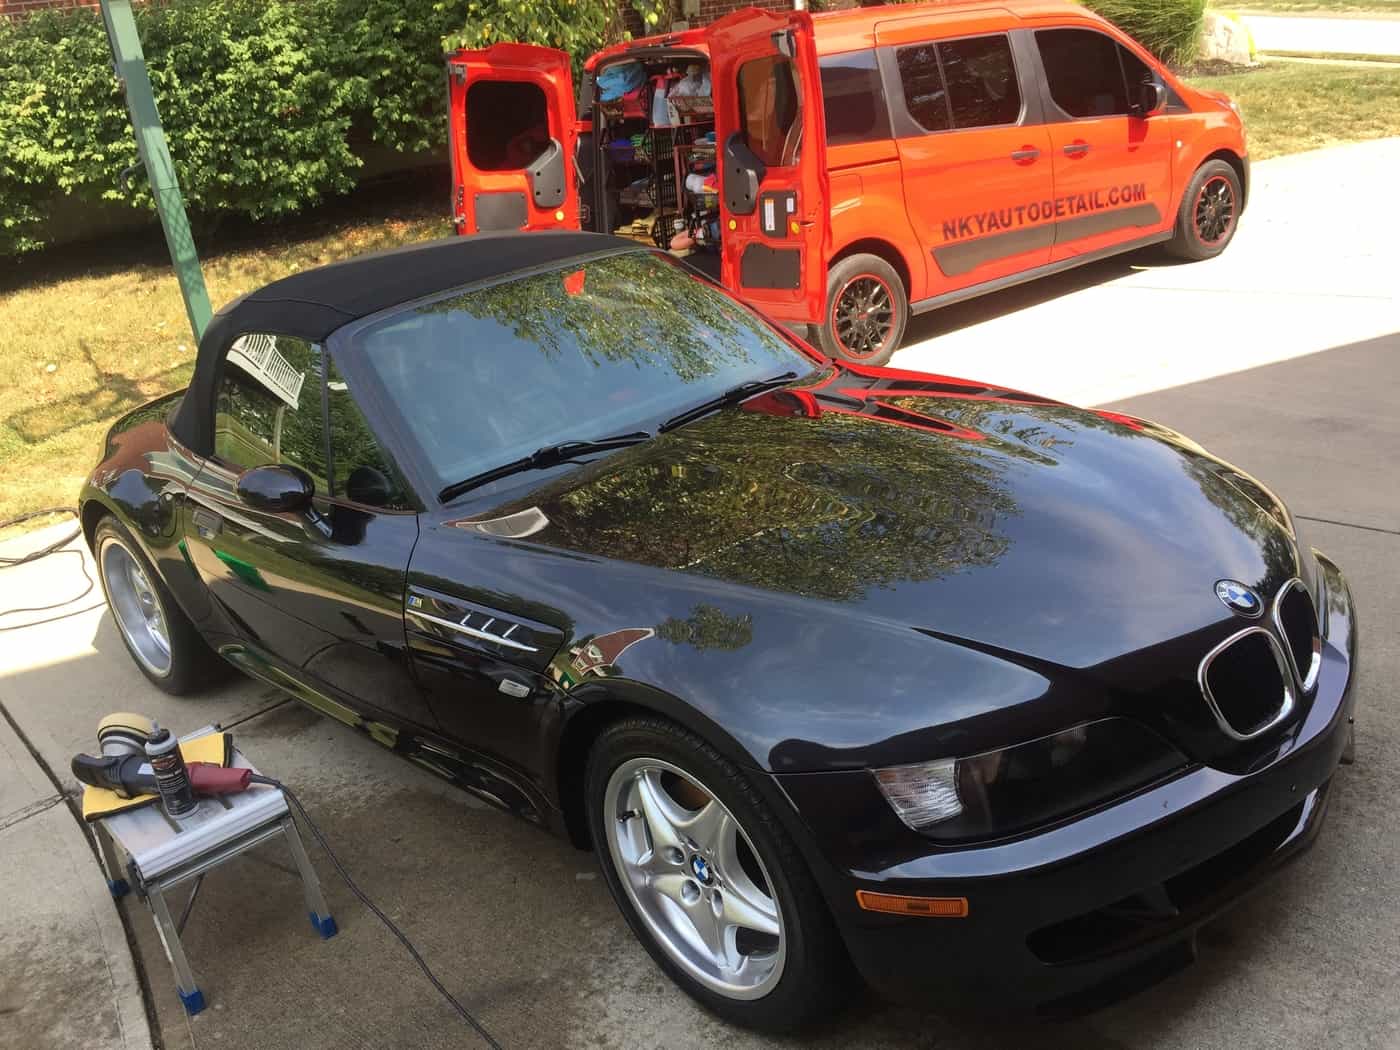 Northern KY Auto Detailing